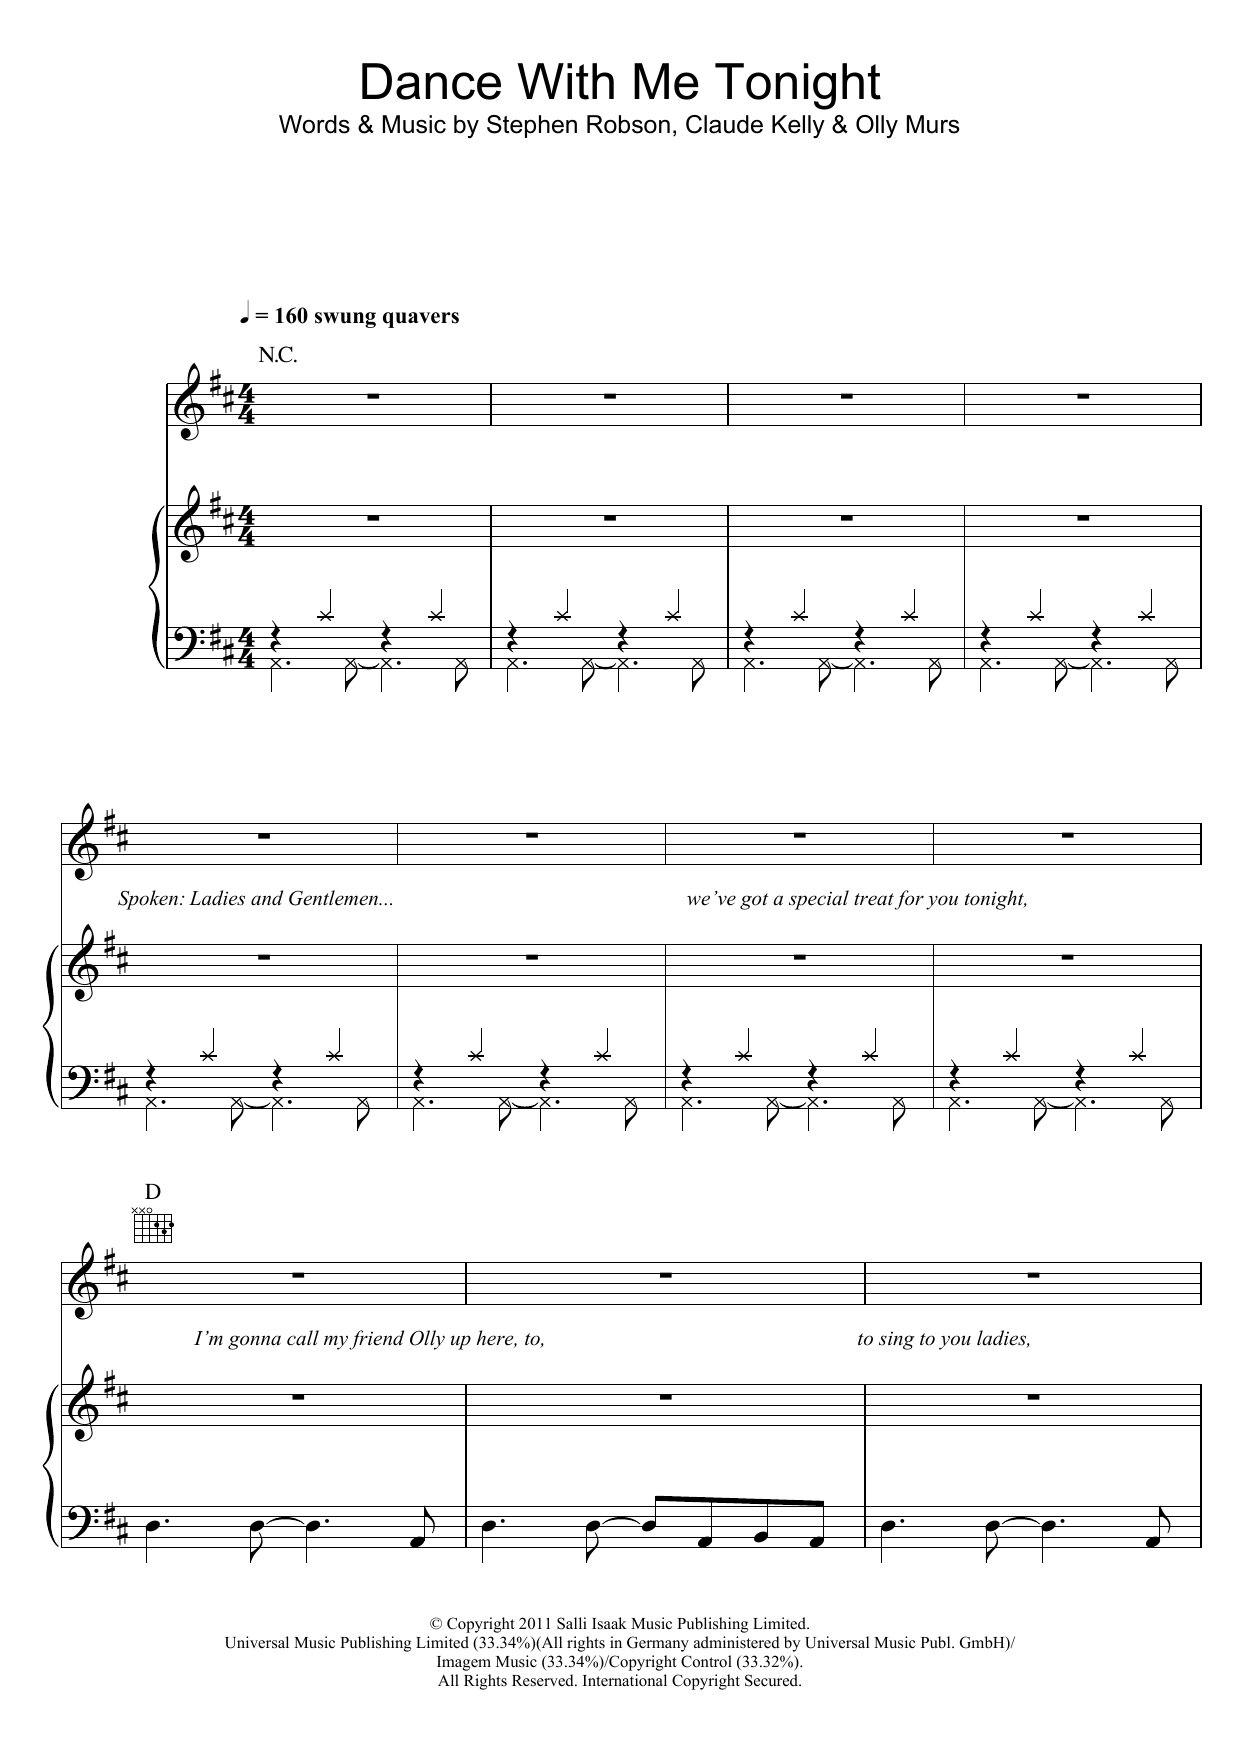 Download Olly Murs Dance With Me Tonight Sheet Music